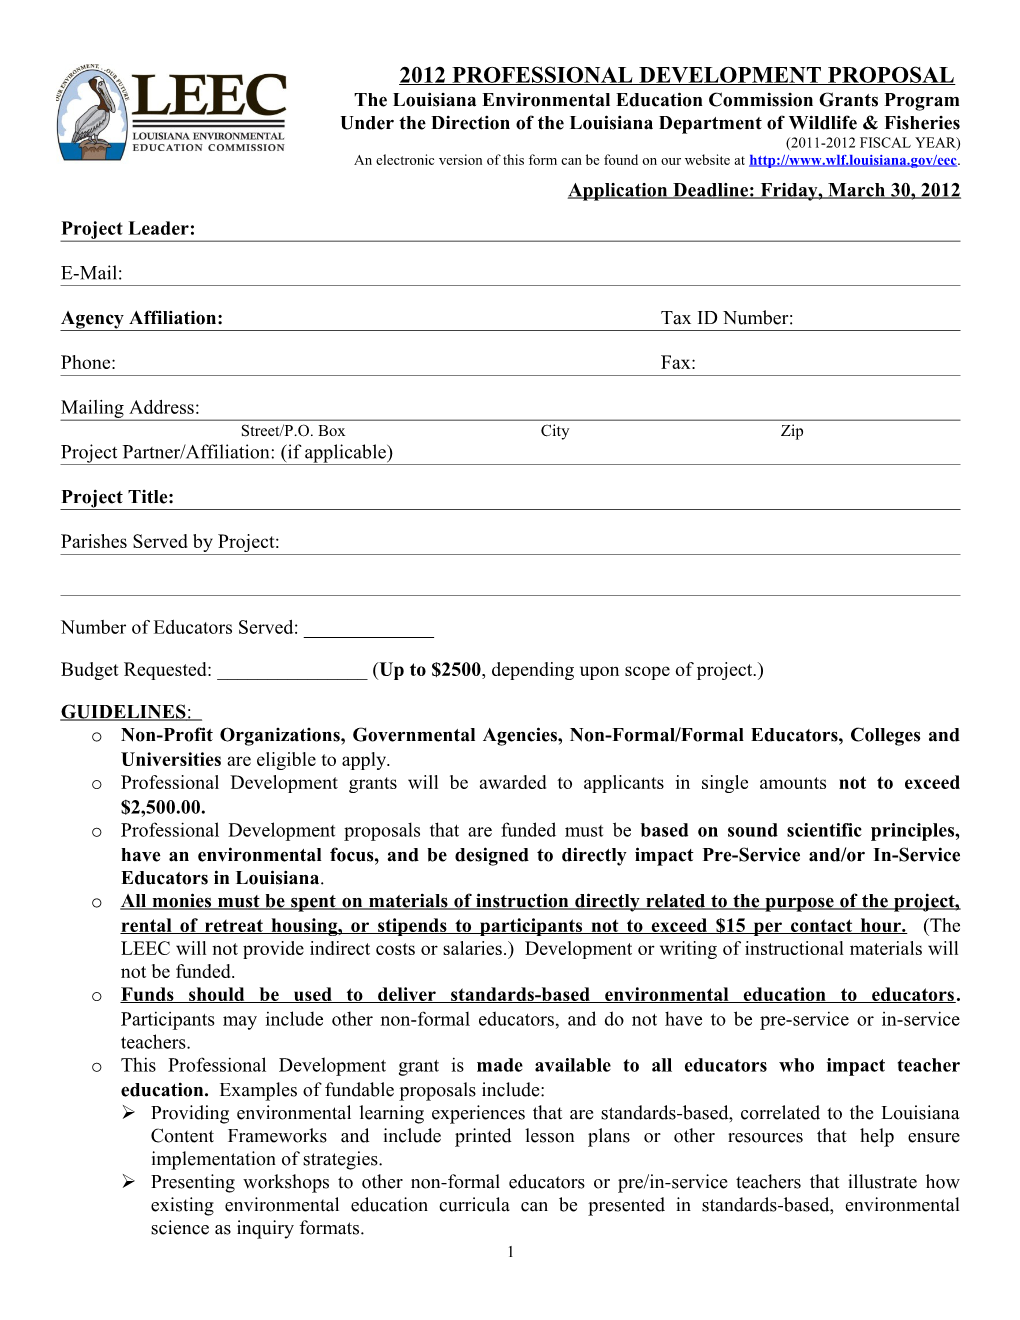 Grant Application Form s1